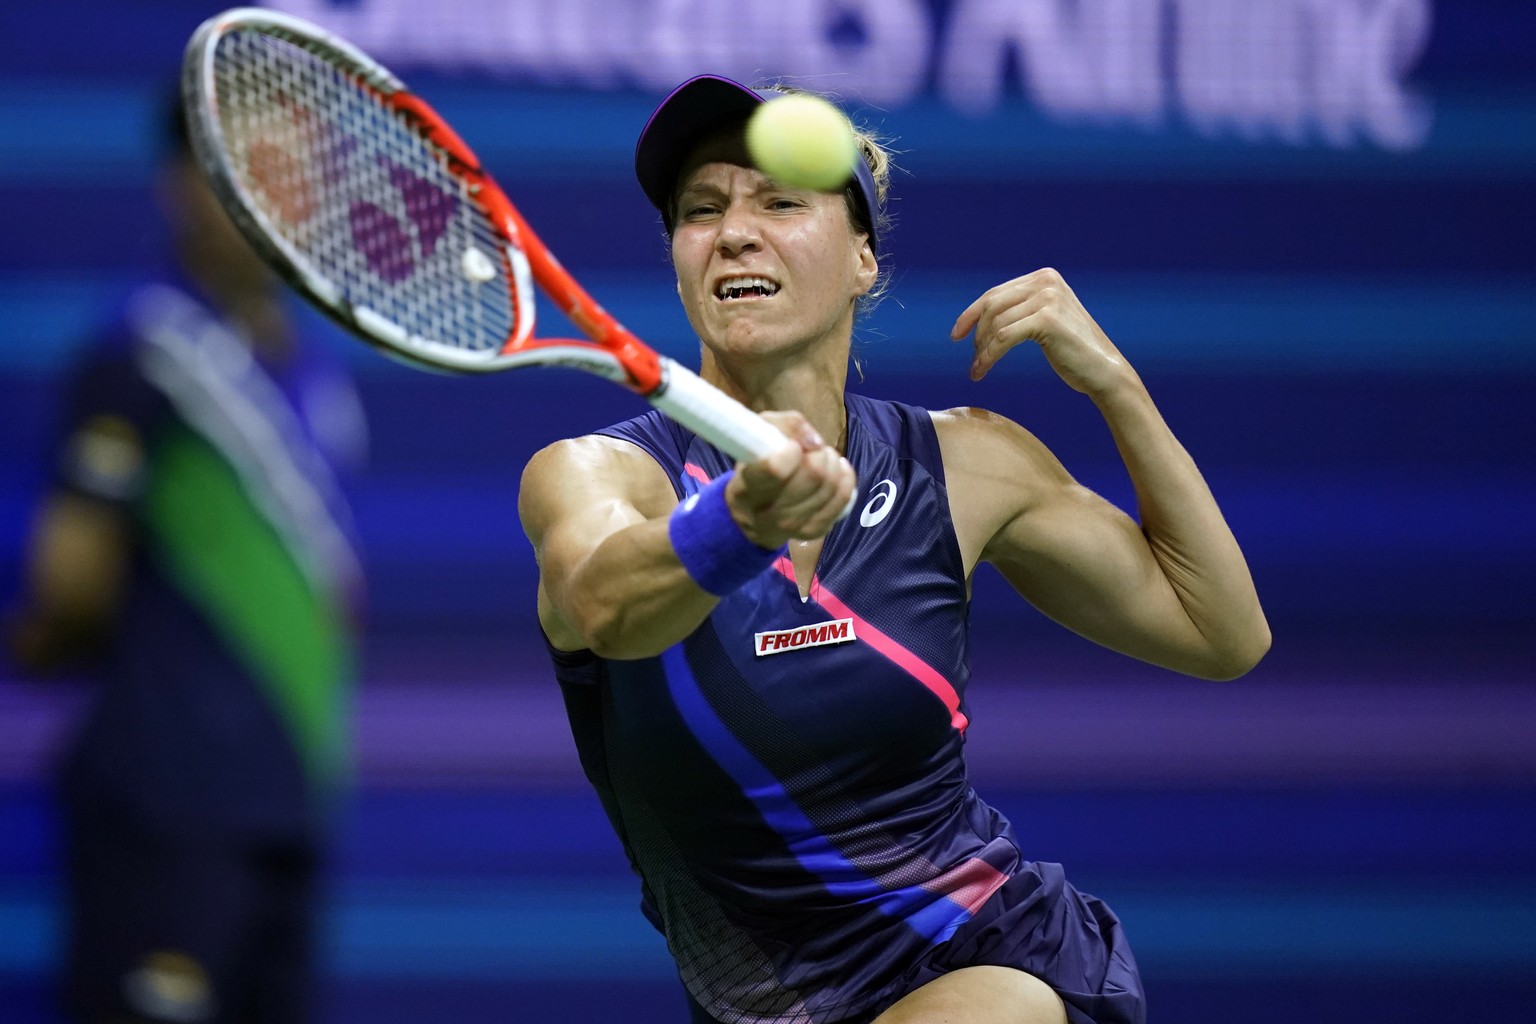 Viktorija Golubic, of Switzerland, returns the ball during the first round of the US Open tennis championships, Tuesday, Aug. 31, 2021, in New York. (AP Photo/Frank Franklin II)